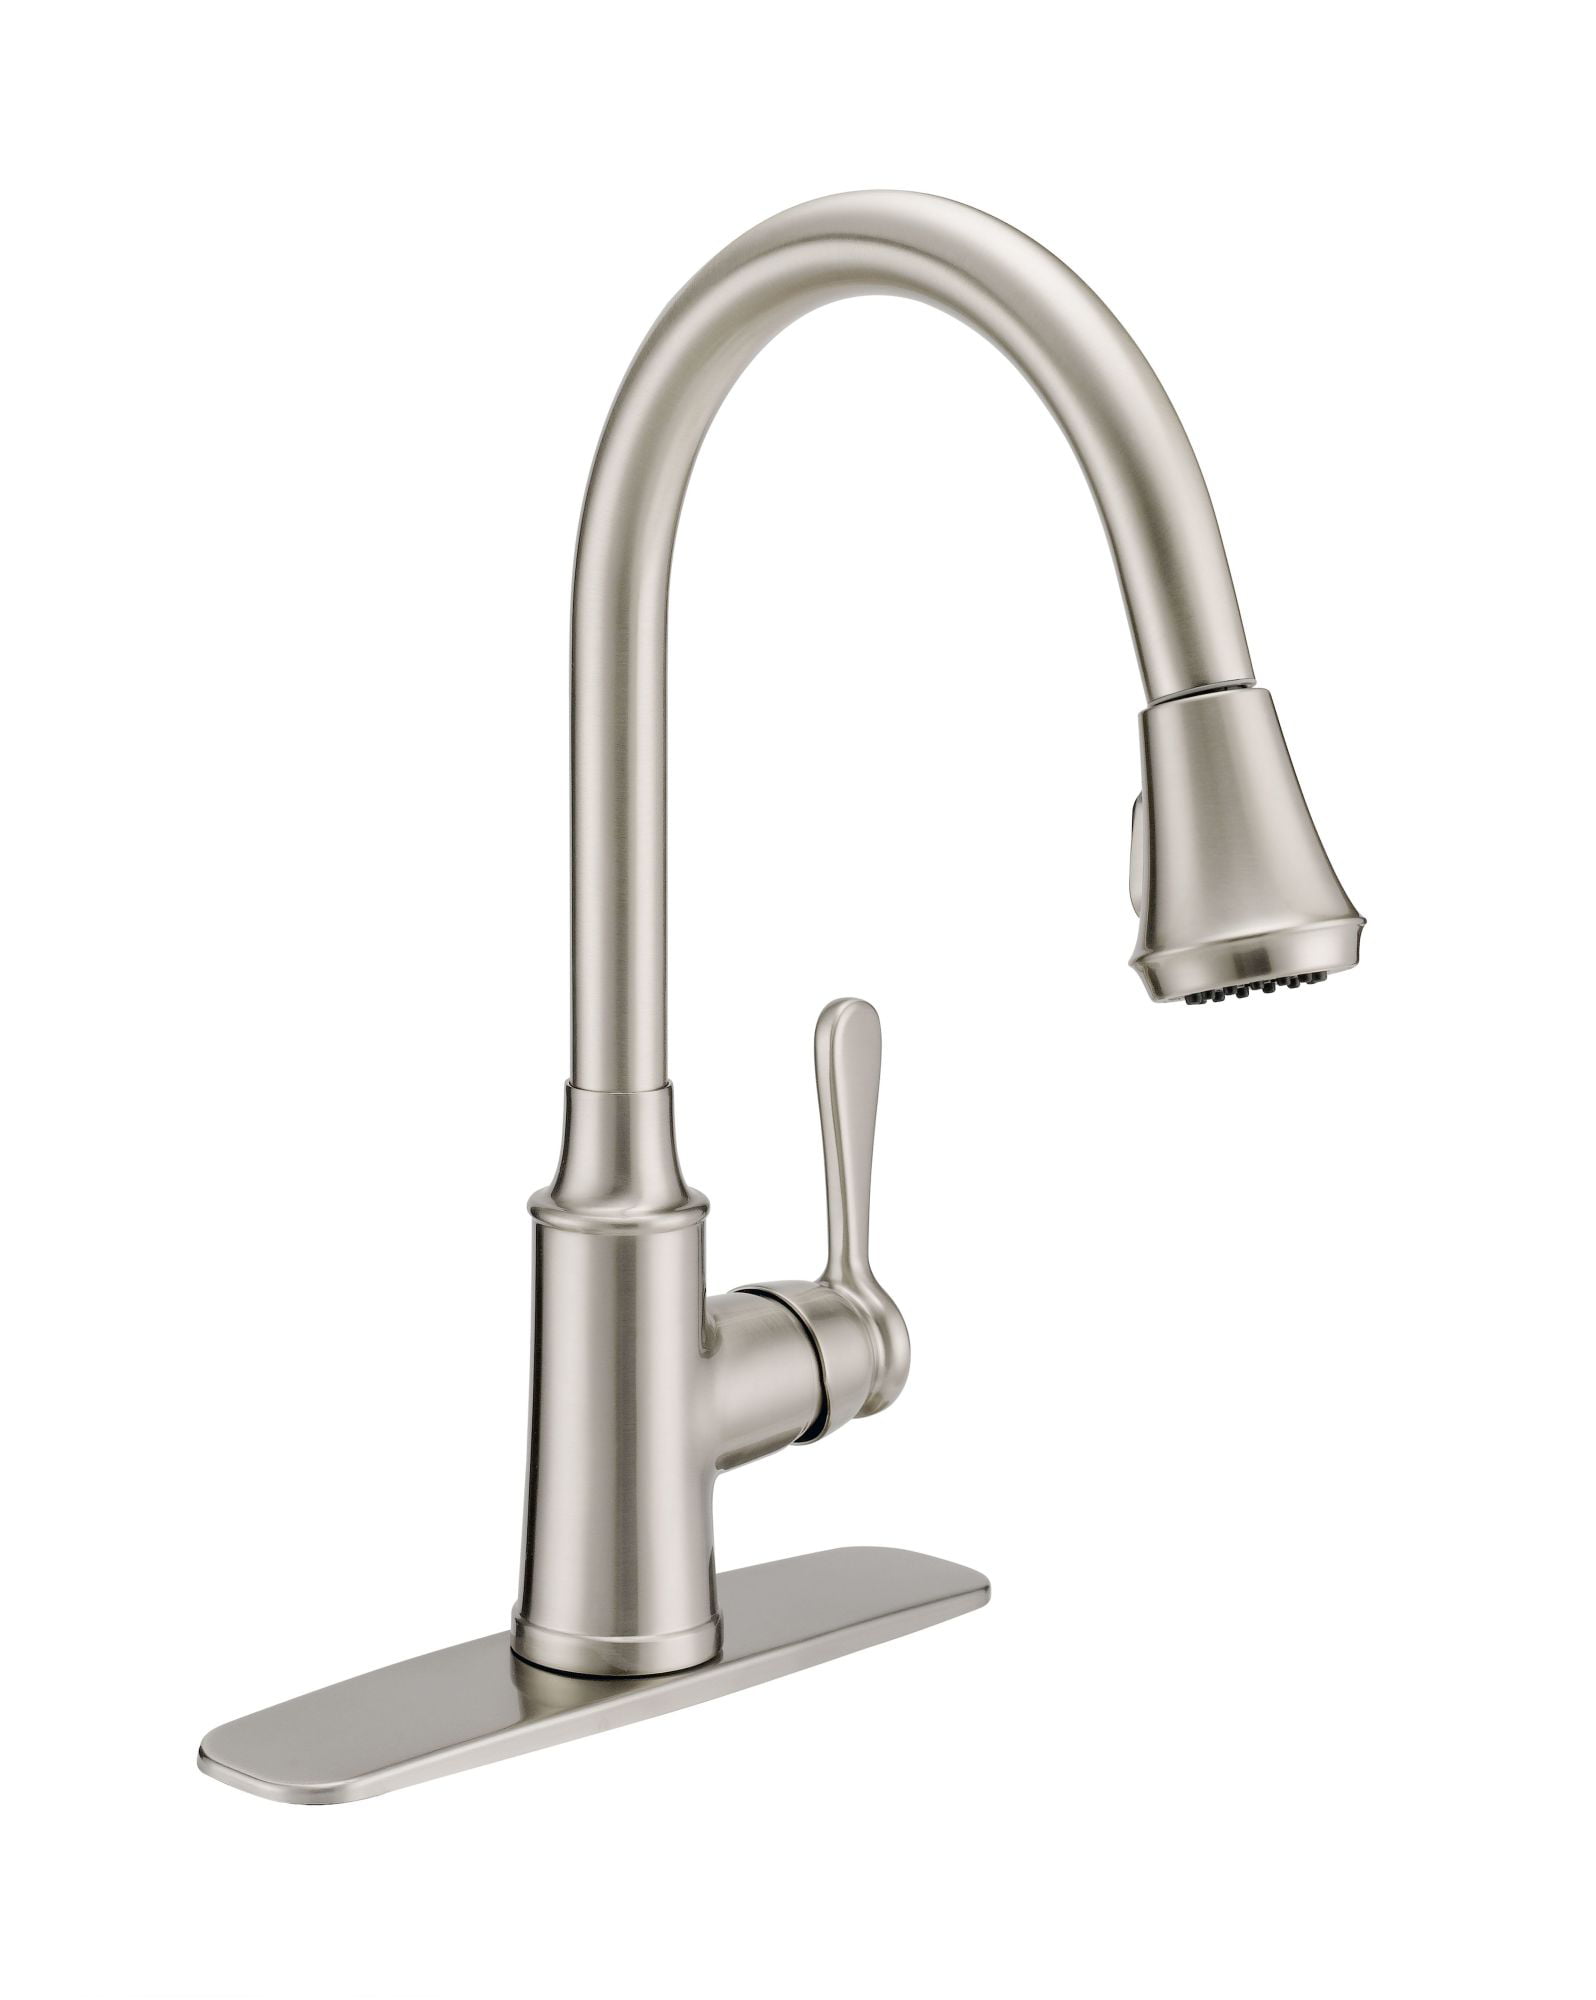 Proflo Pfxcm1m214 1.8 GPM Single Hole Pull Down Kitchen Faucet - Nickel ...